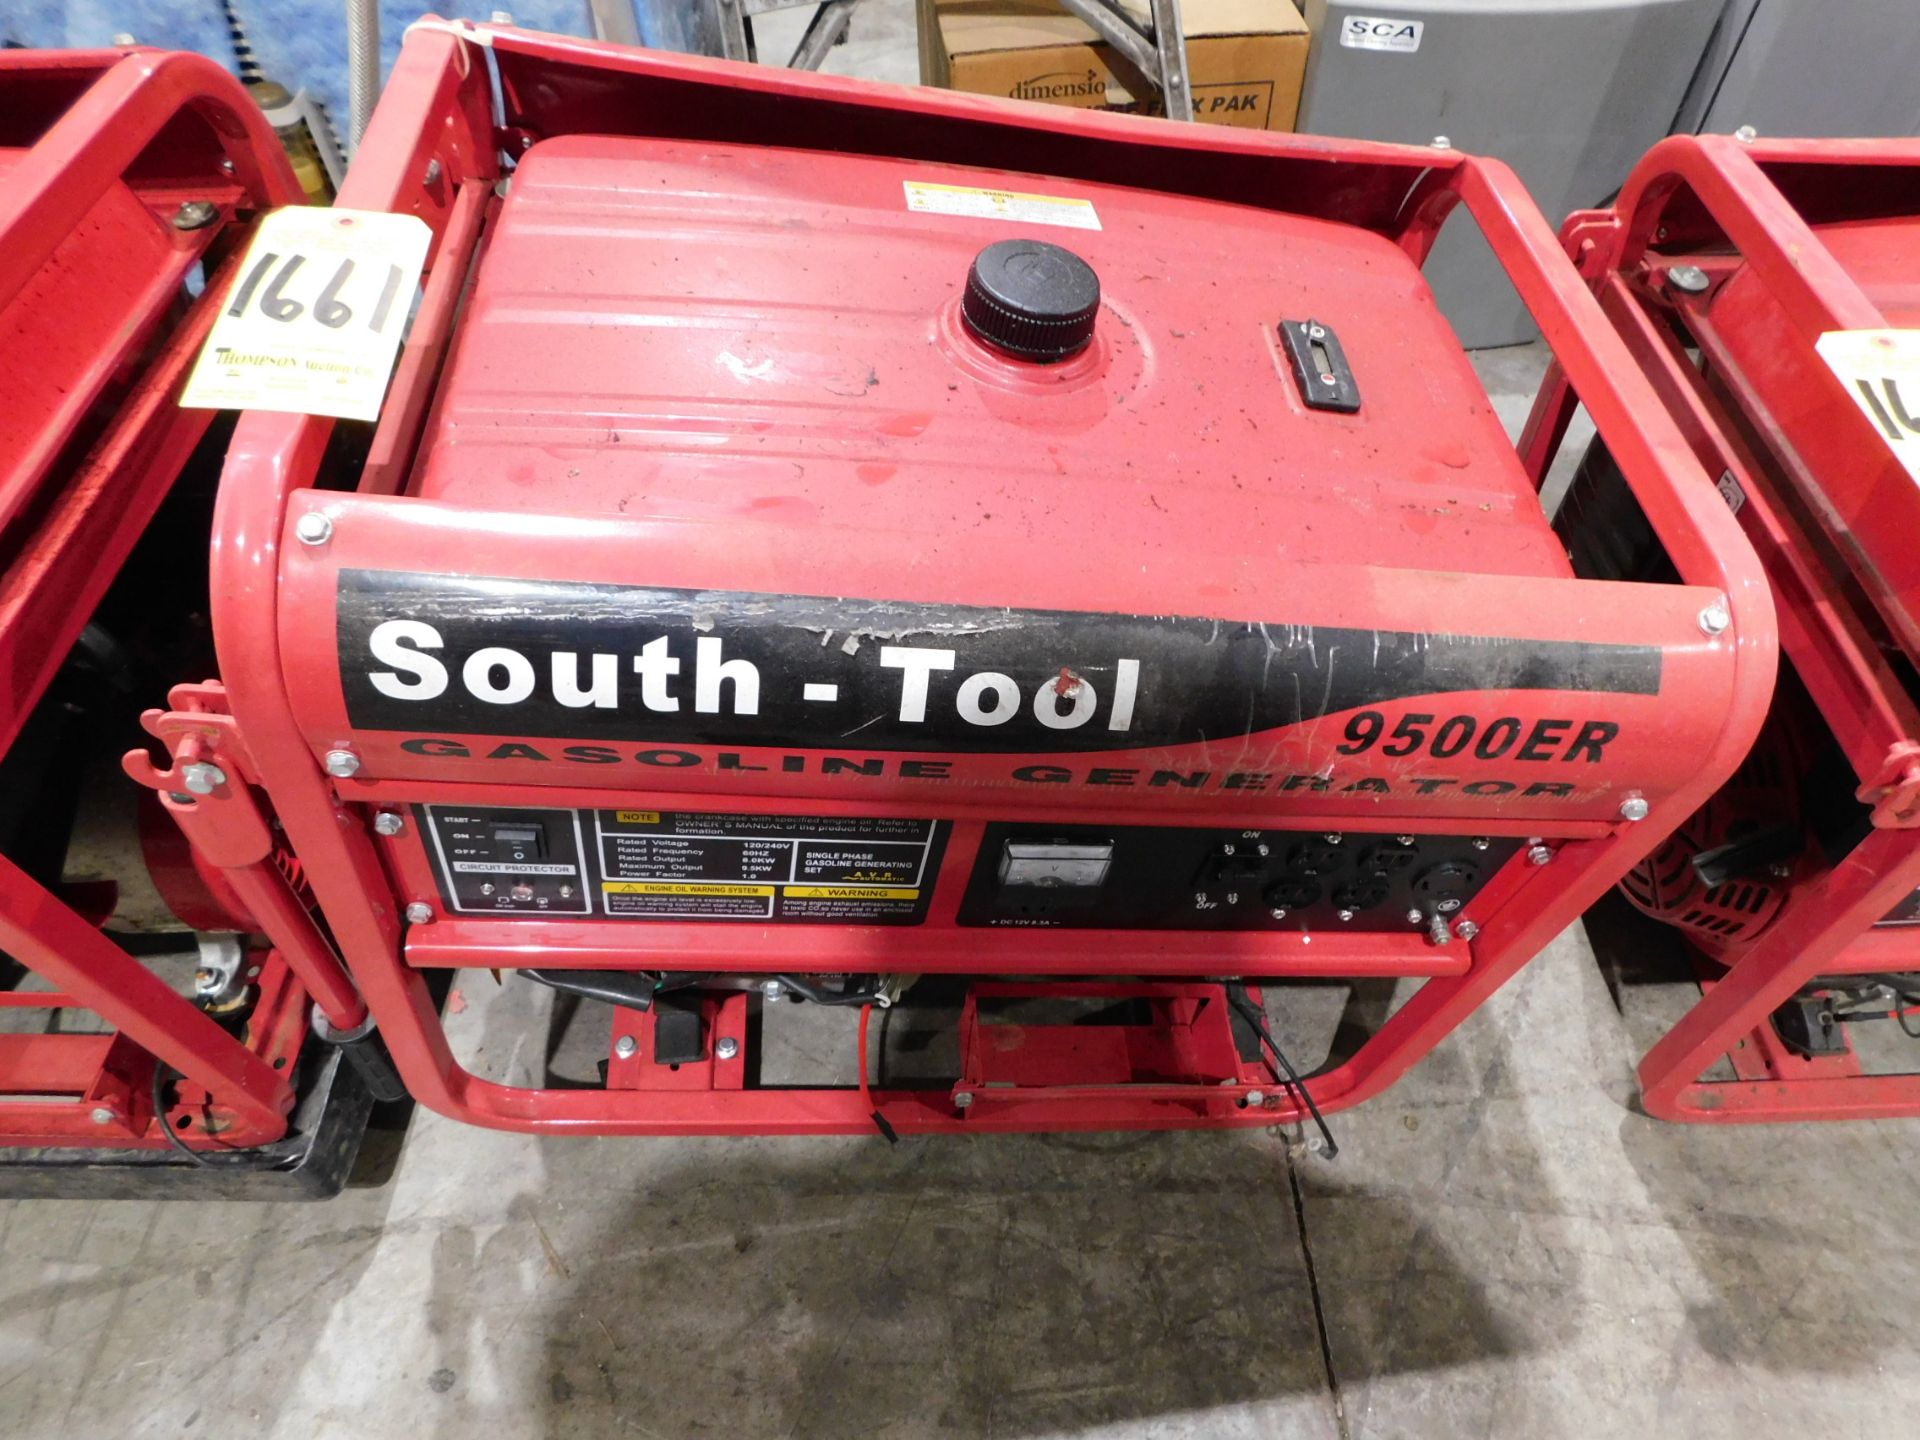 South Tool Model 9500 ER Gas Powered Generator, 9500 Max Watts, 15 H.P. Condition Unknown